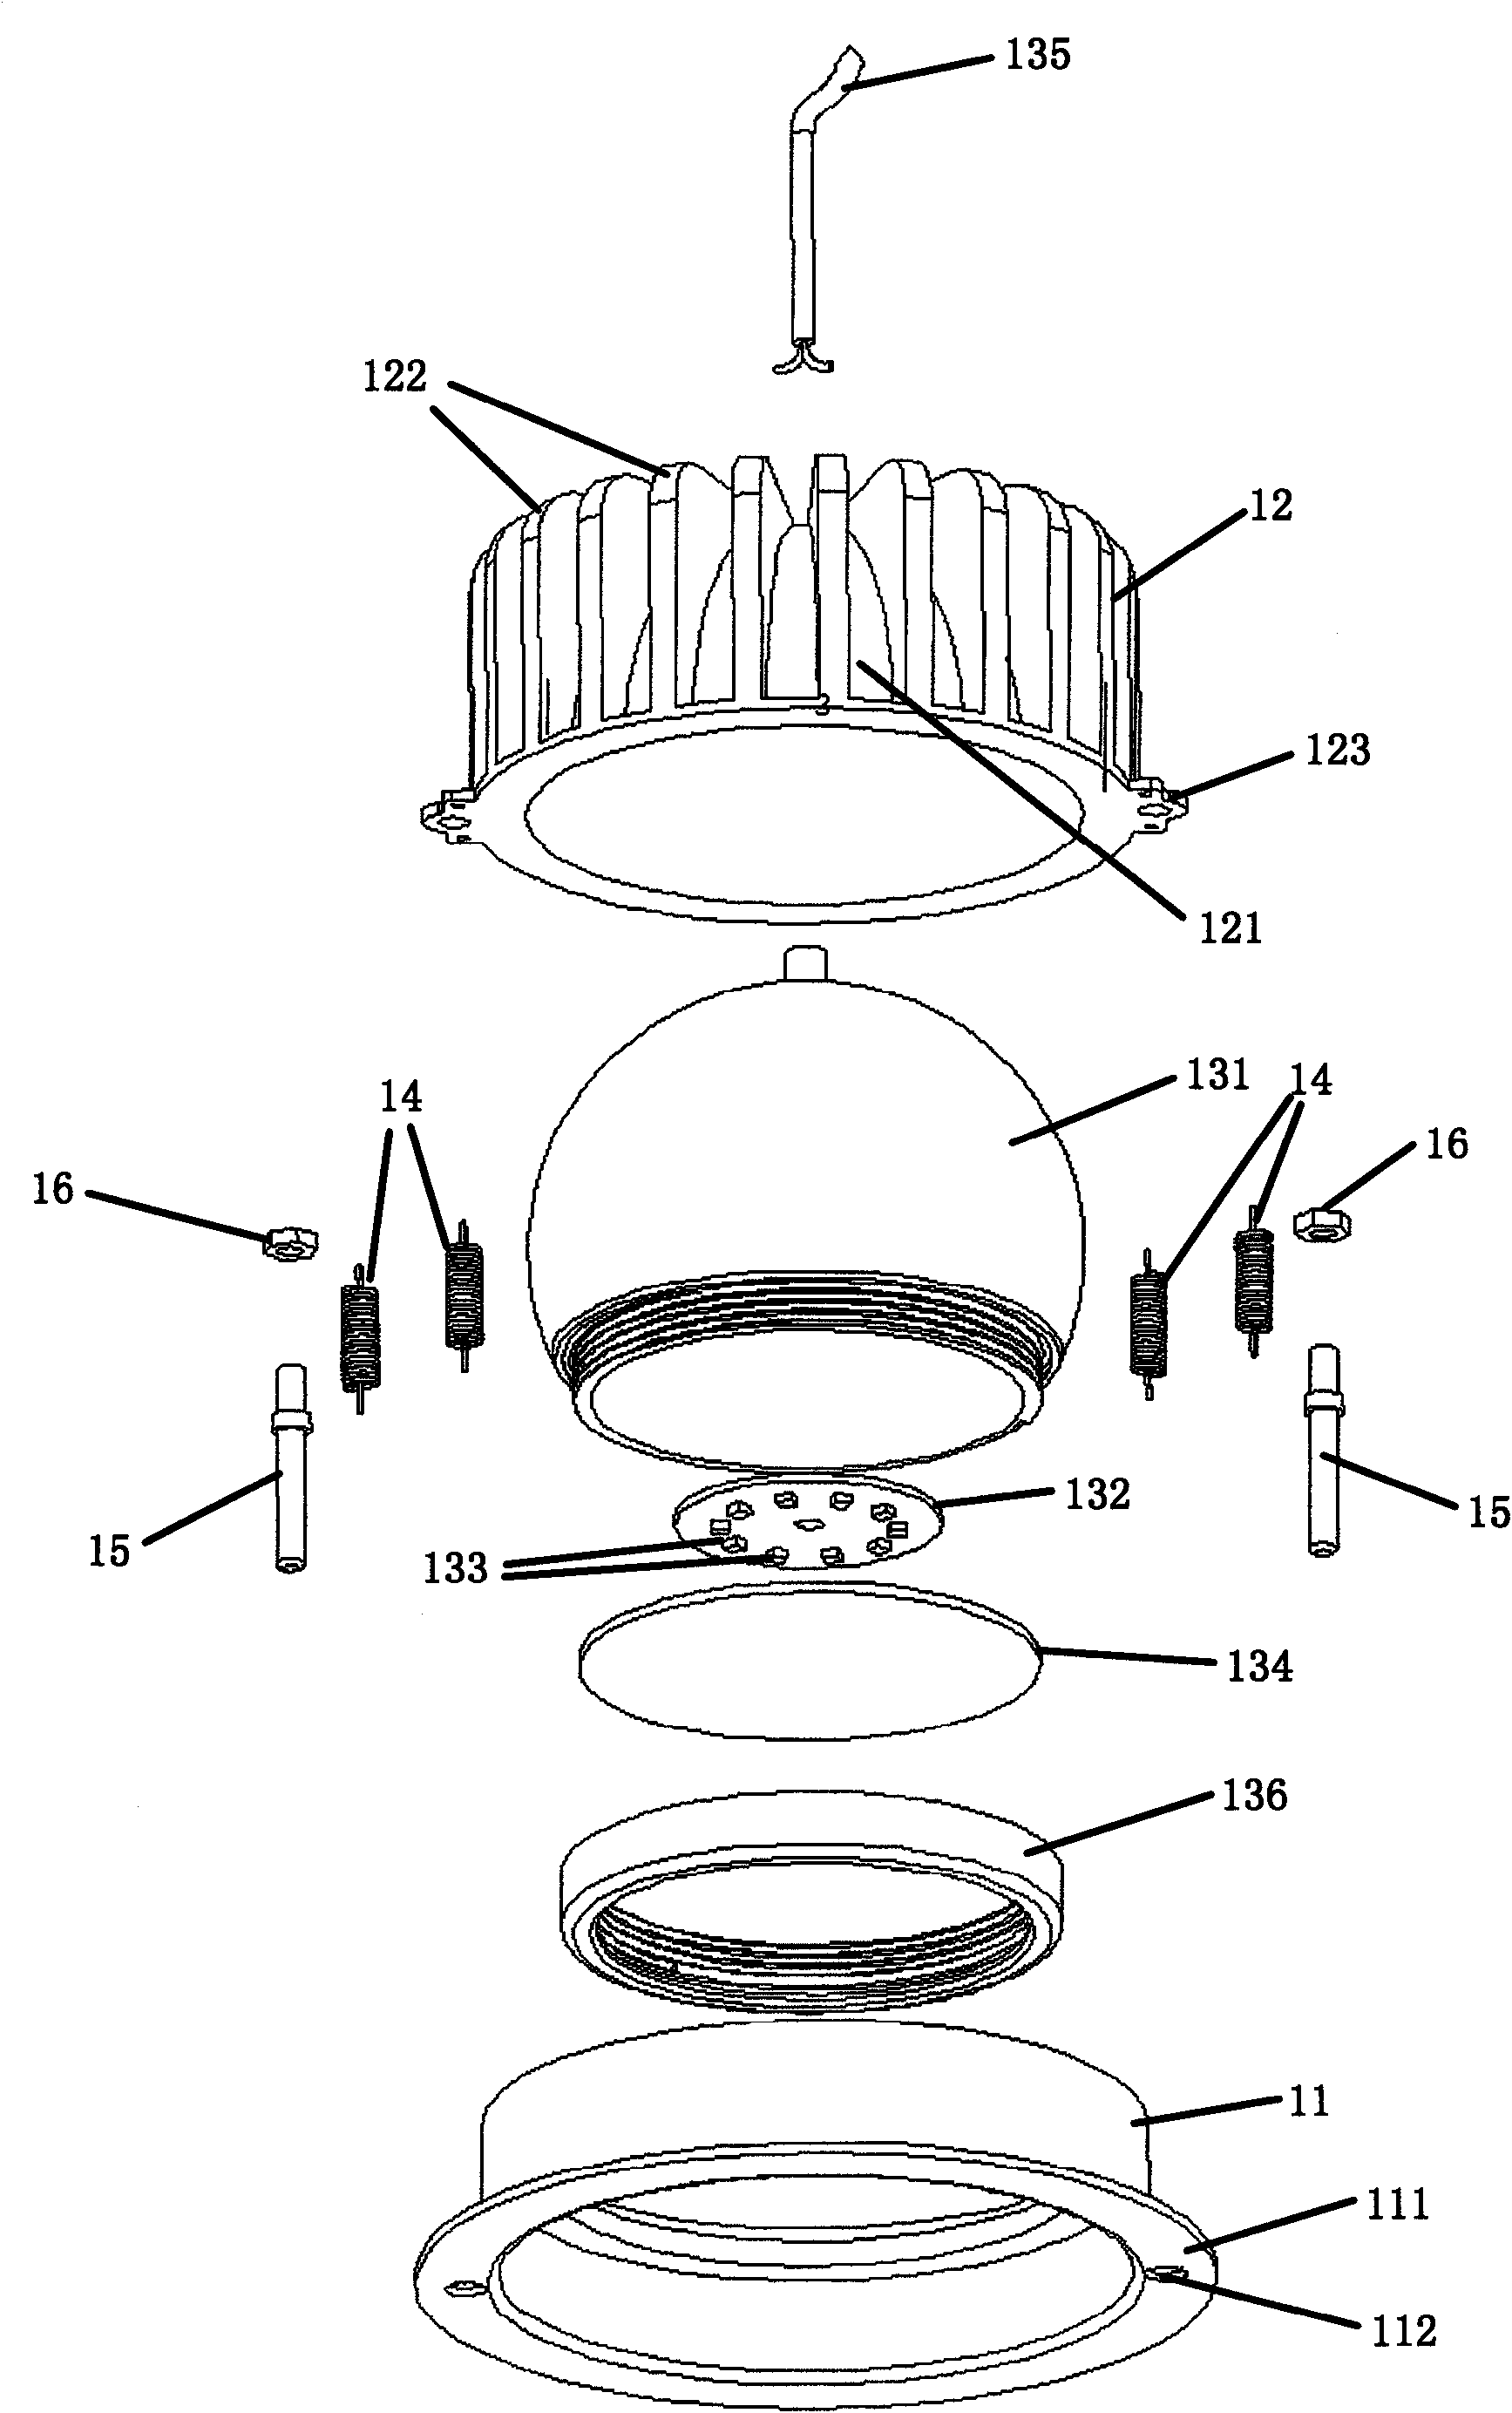 Down lamp capable of adjusting irradiation angle multi-directionally